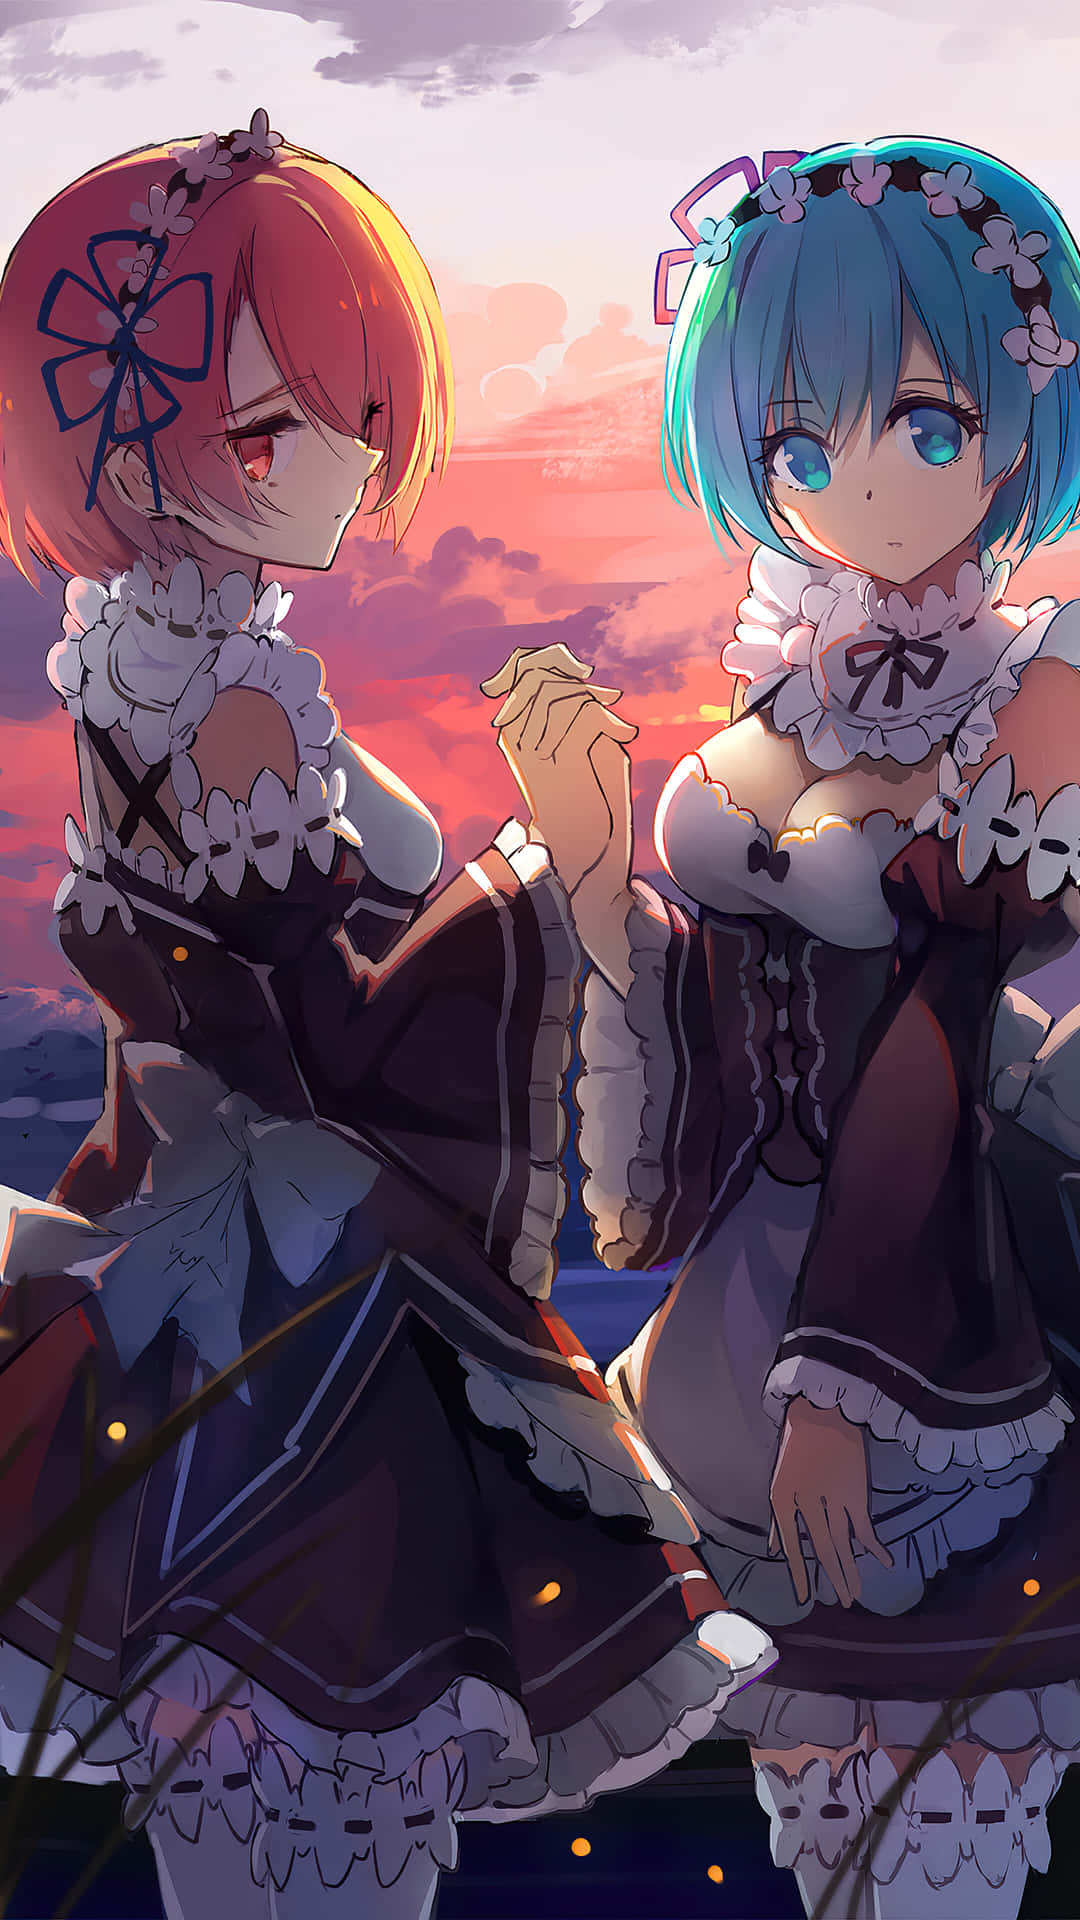 Ram and Rem, reunited in harmony Wallpaper